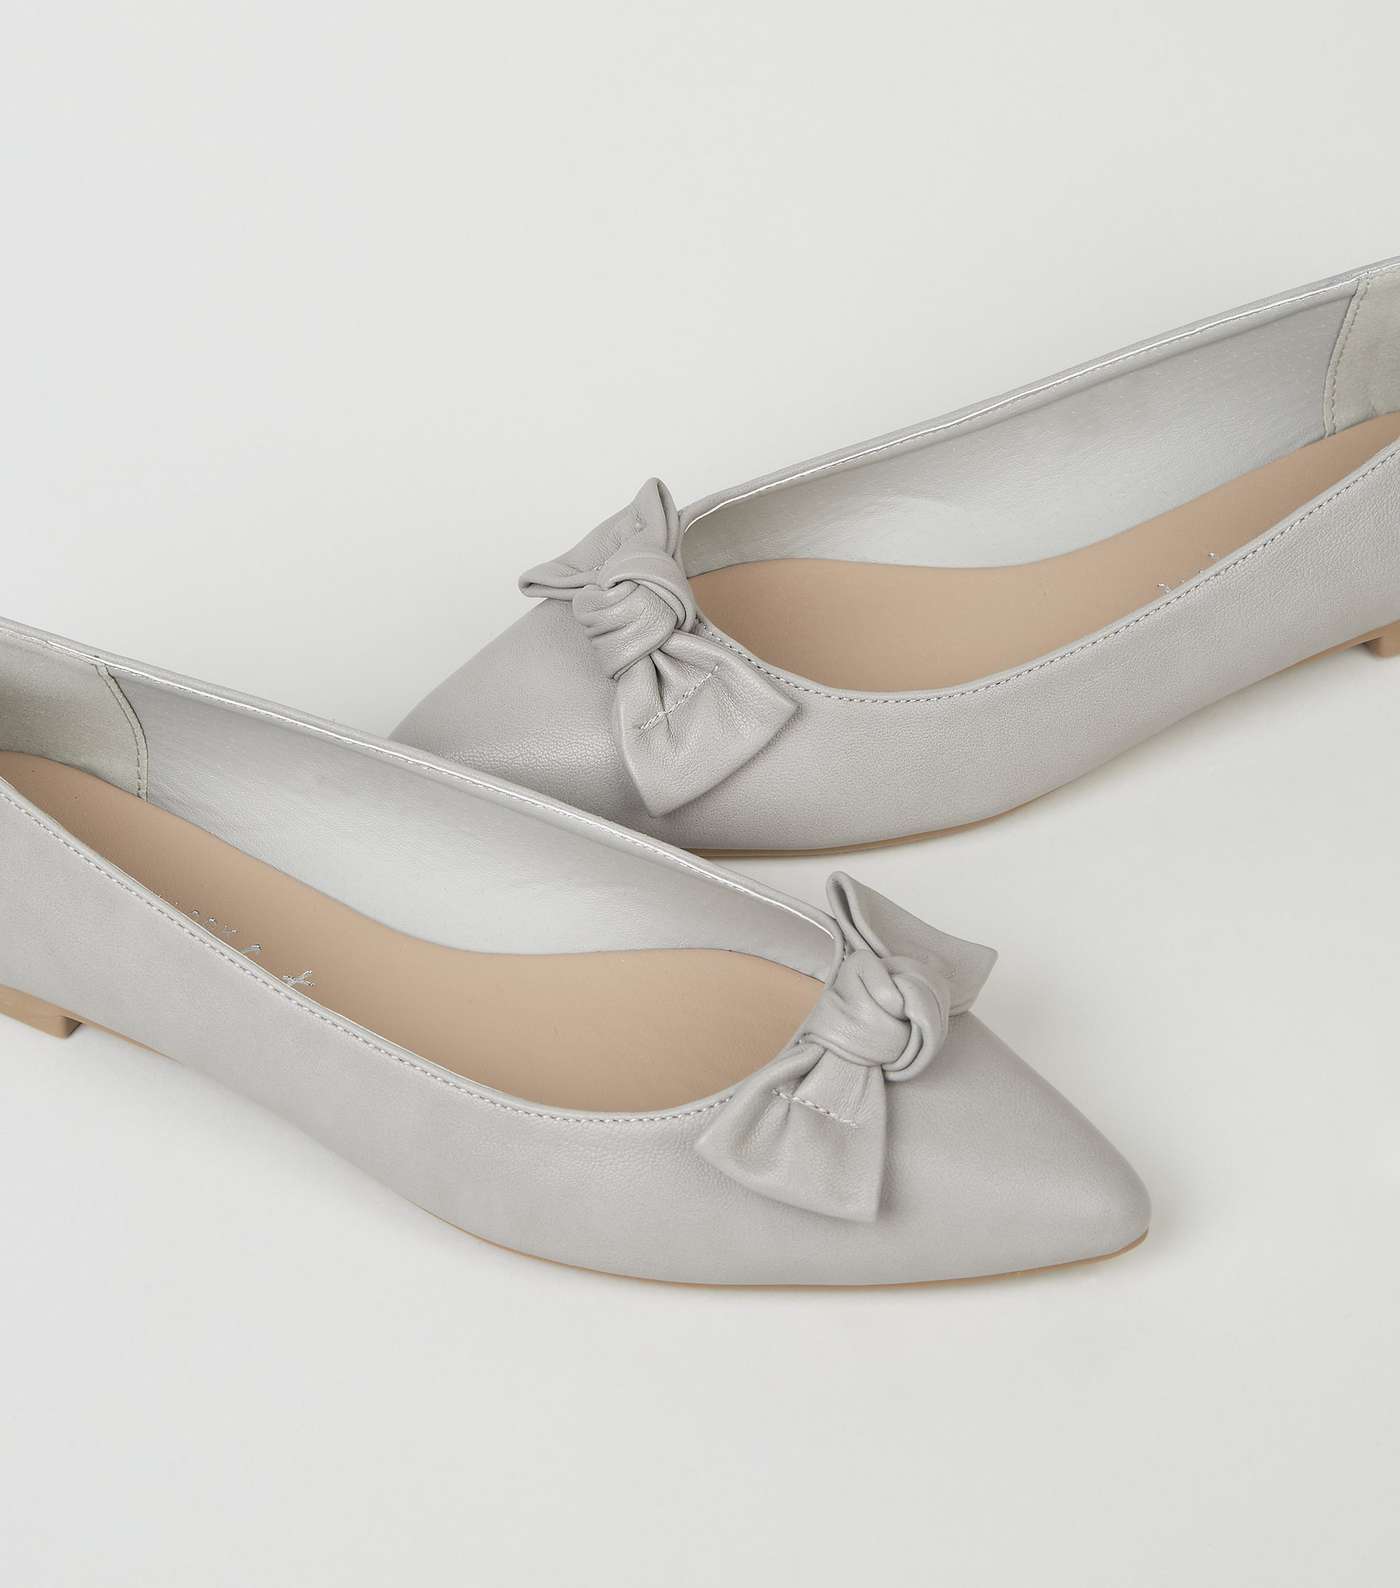 Grey Leather-Look Pointed Bow Ballet Pumps Image 3